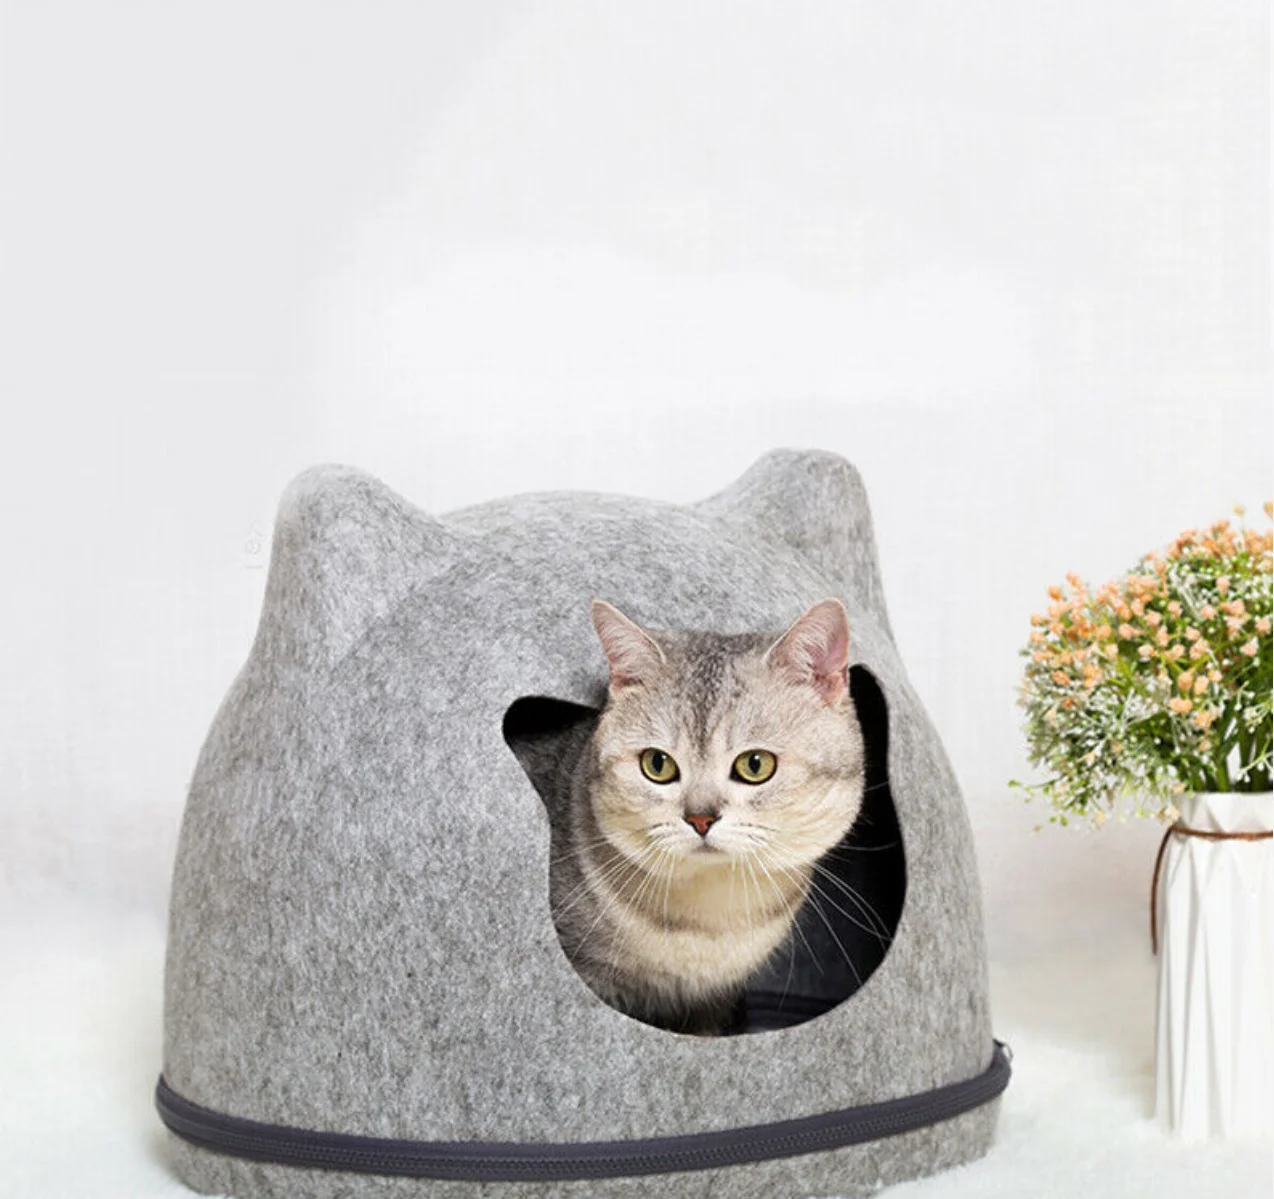 

New home removable cute cat head shape felt cat cave with zipper, Customized color